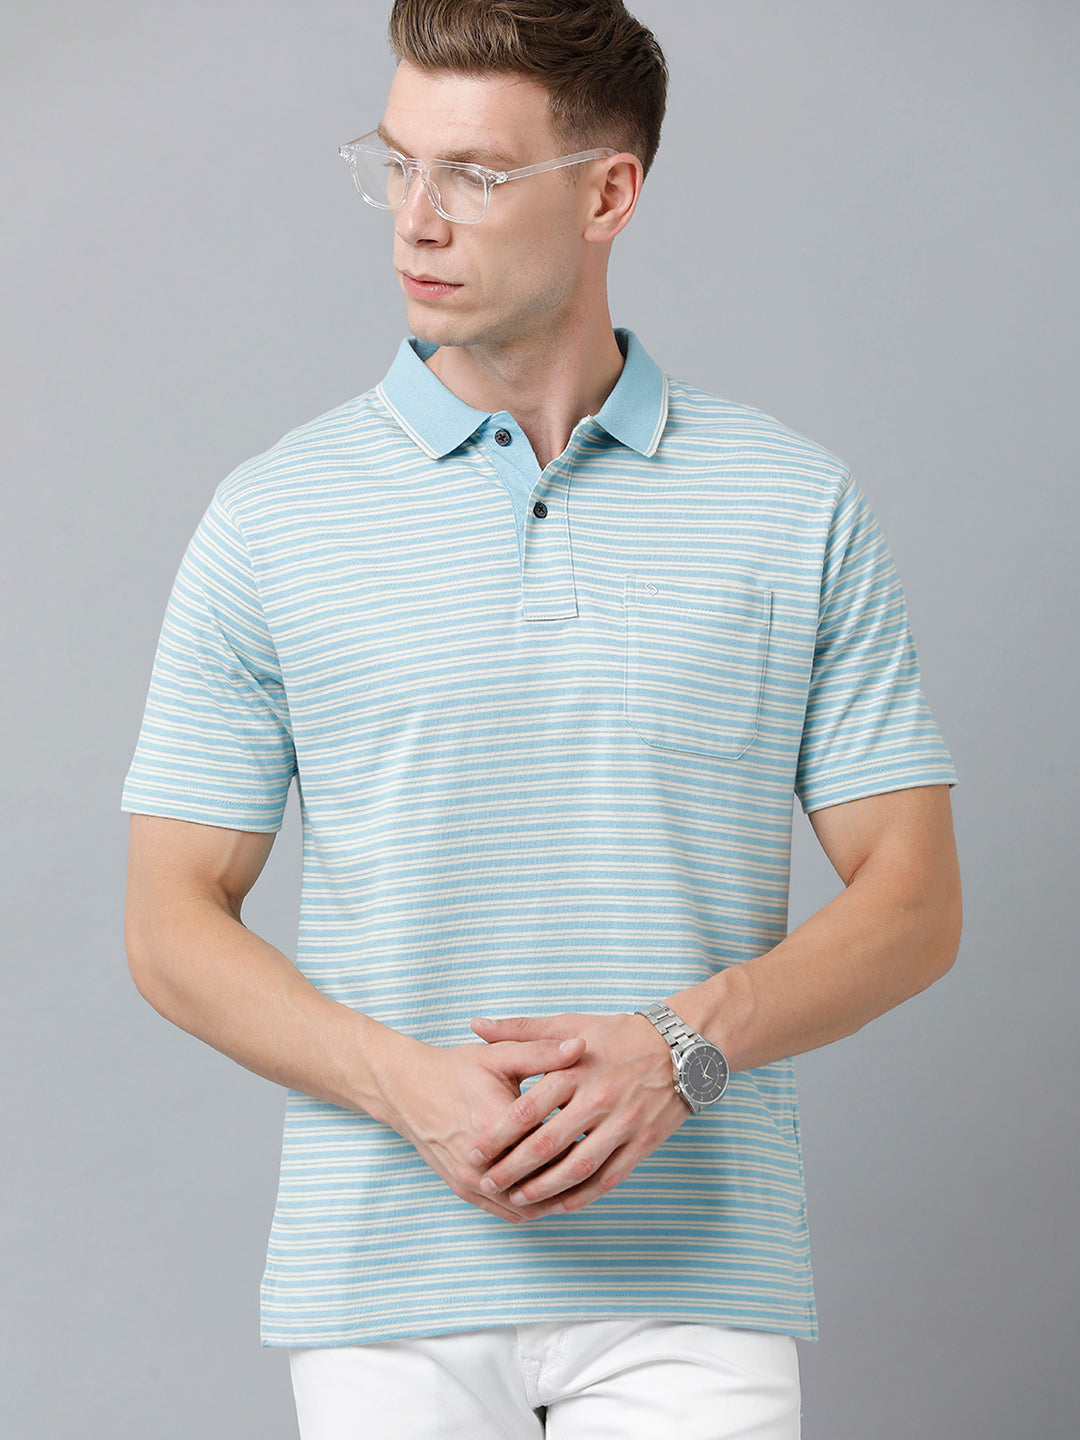 Classic Polo Men's Cotton Half Sleeve Striped Authentic Fit Polo Neck Sky Blue Color T-Shirt | Feeders - 212 B